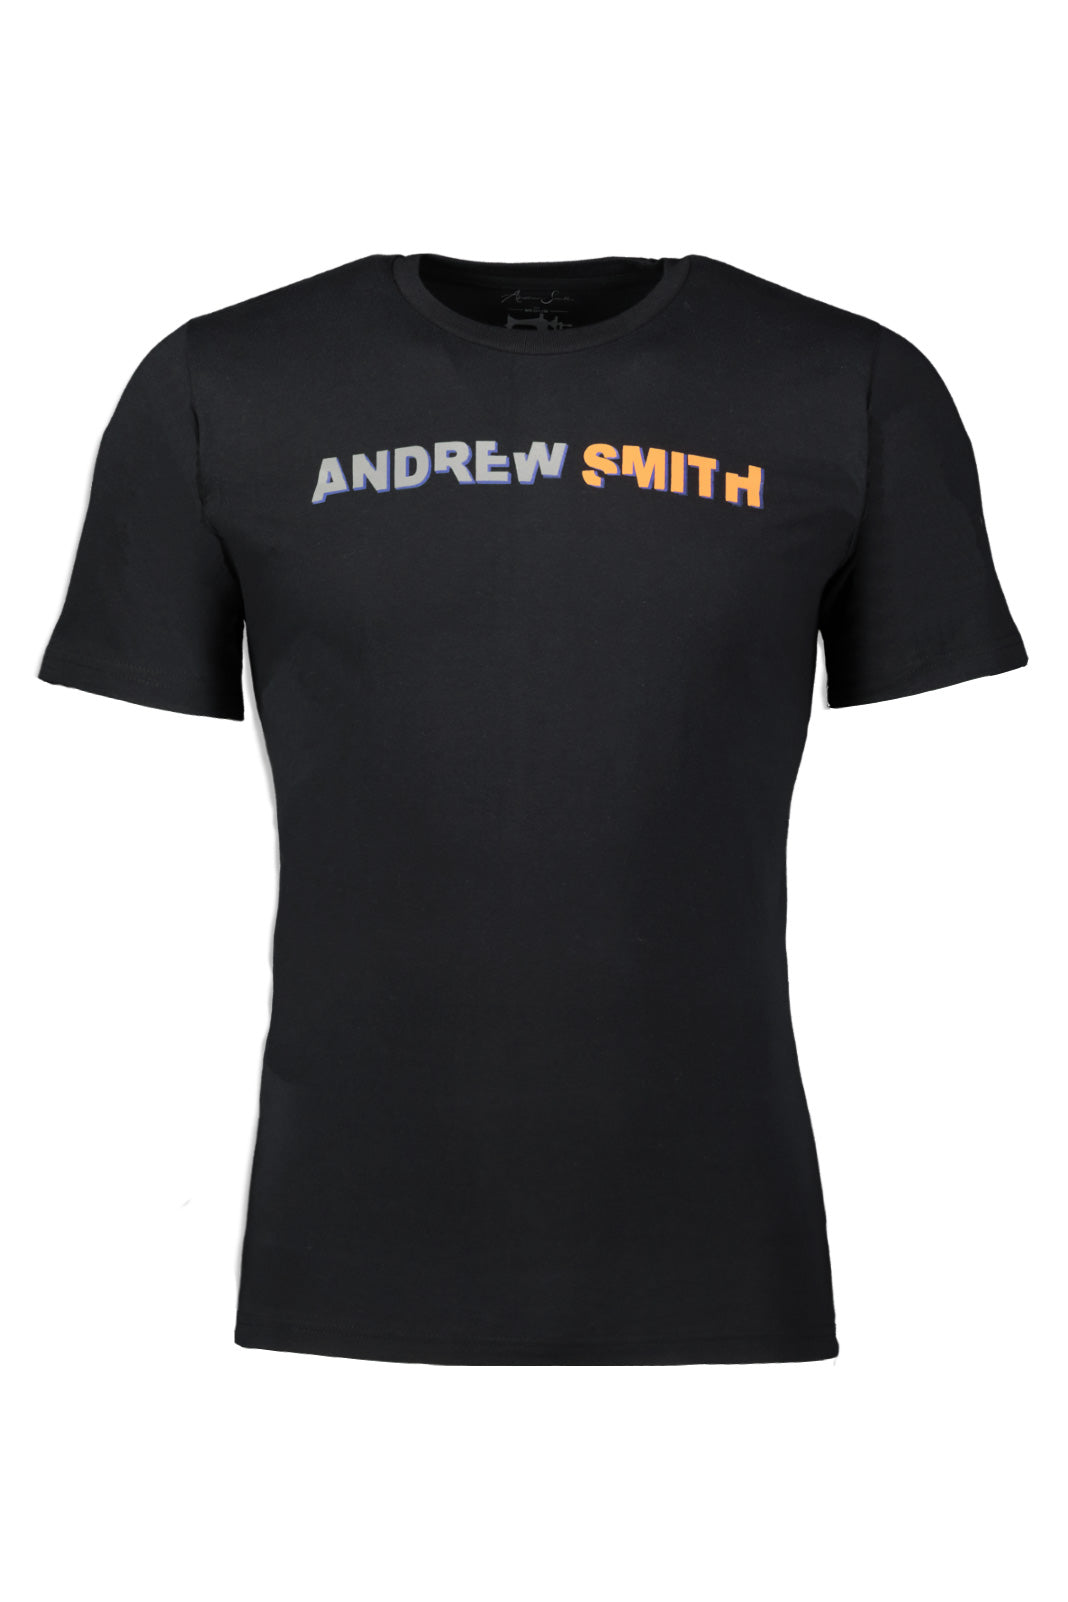 Andrew Smith T-Shirt Slim Fit Pria A0115X01A